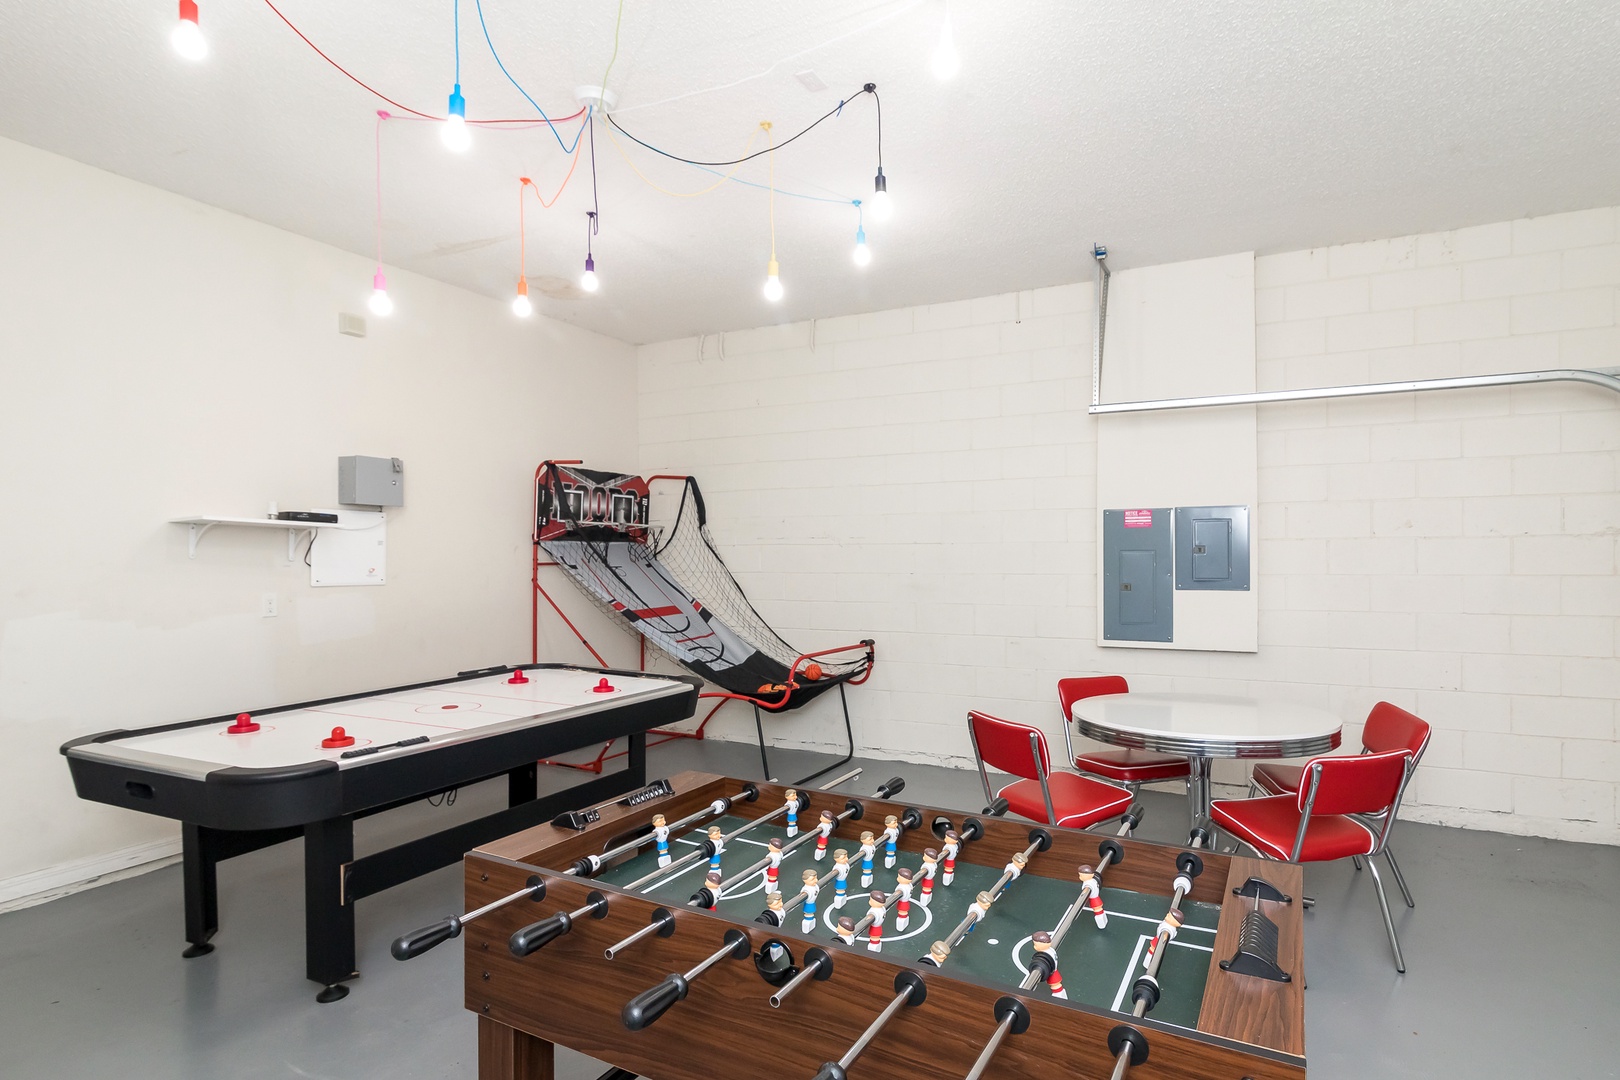 Have a friendly competition in the game room with foosball, air hockey, and basketball